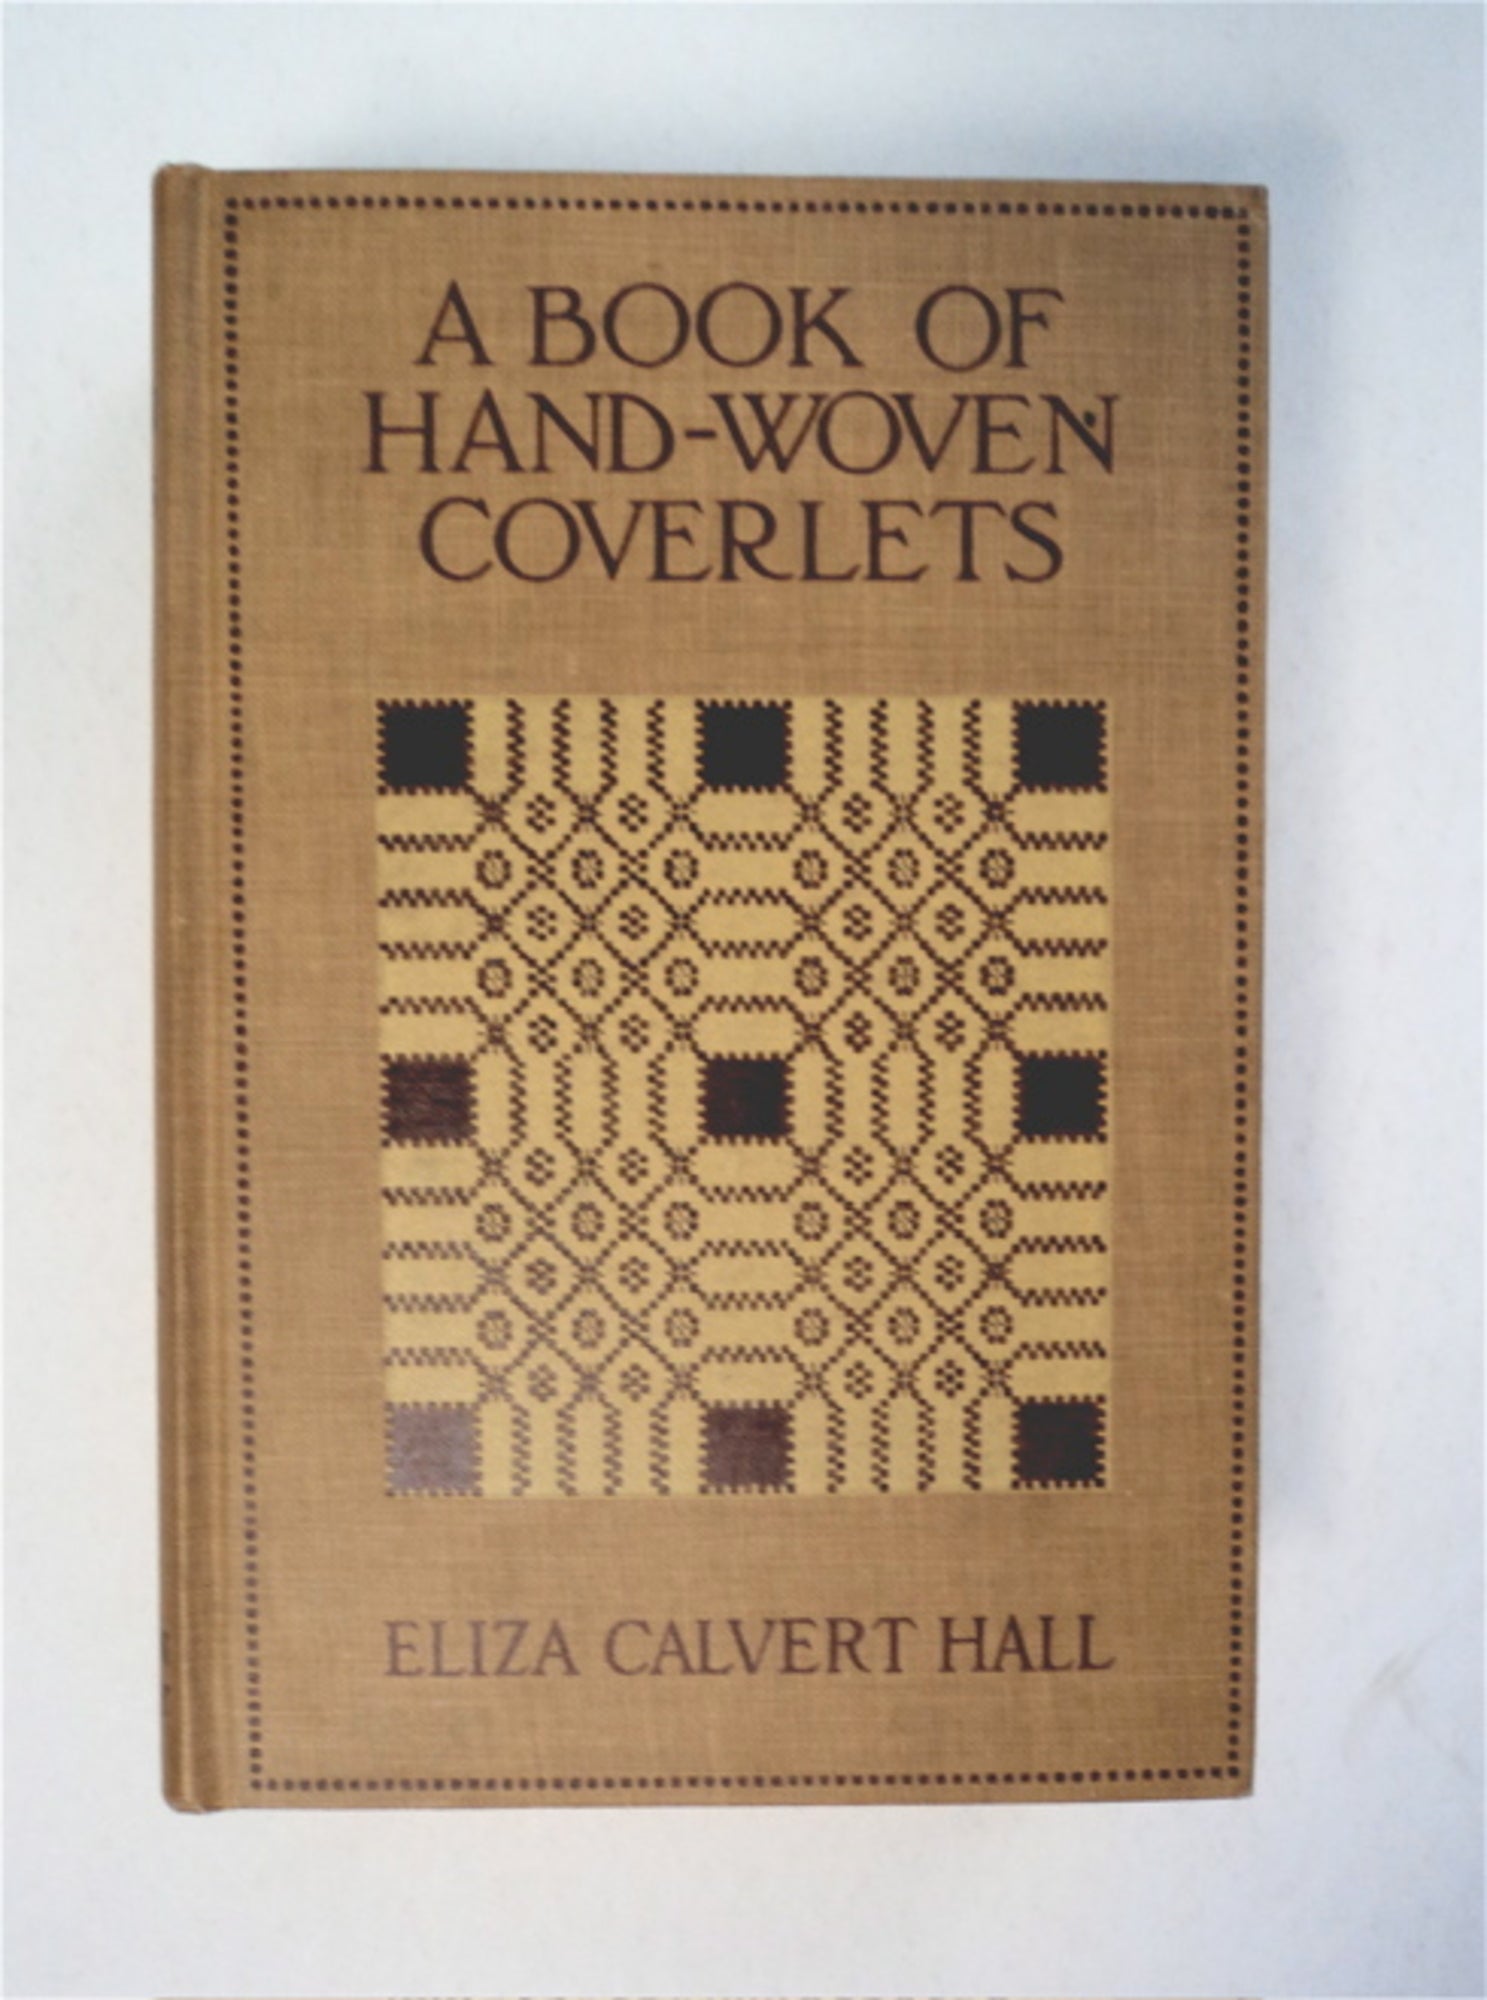 A Book of Hand-Woven Coverlets by Eliza Calvert HALL on Bibliomania